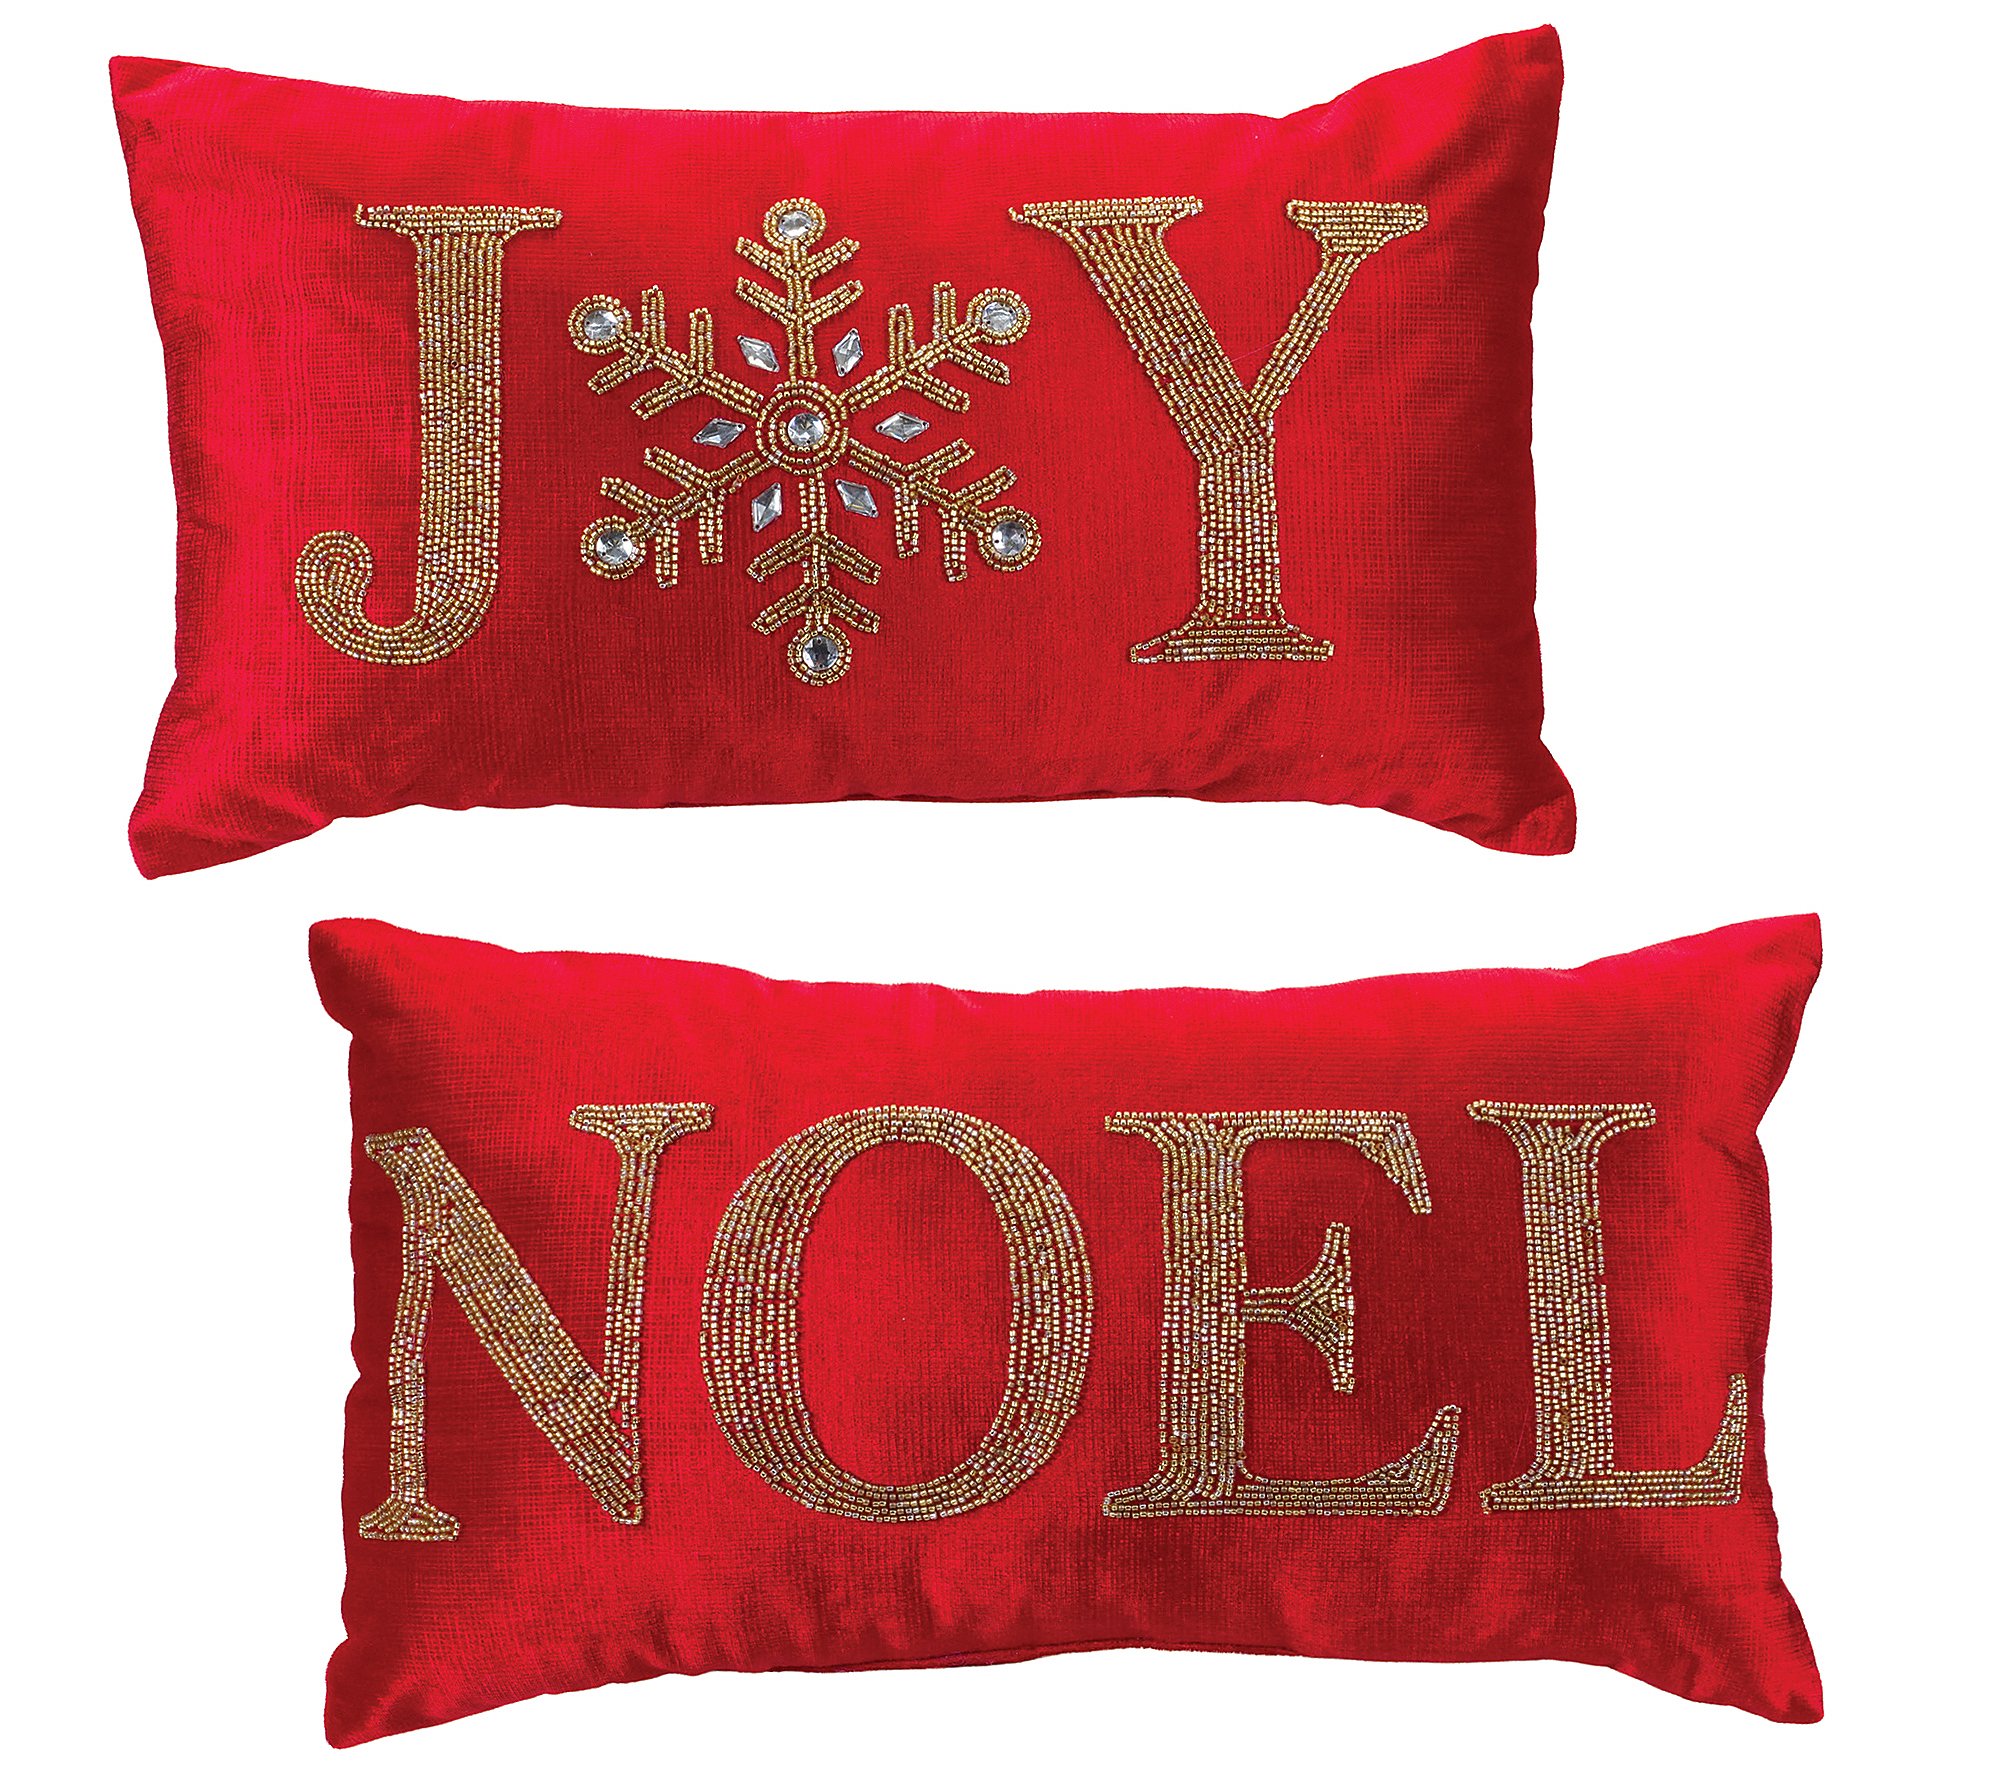 Melrose Joy and Noel Pillow (Set of 2) 19"L x 1 2"H Polyester